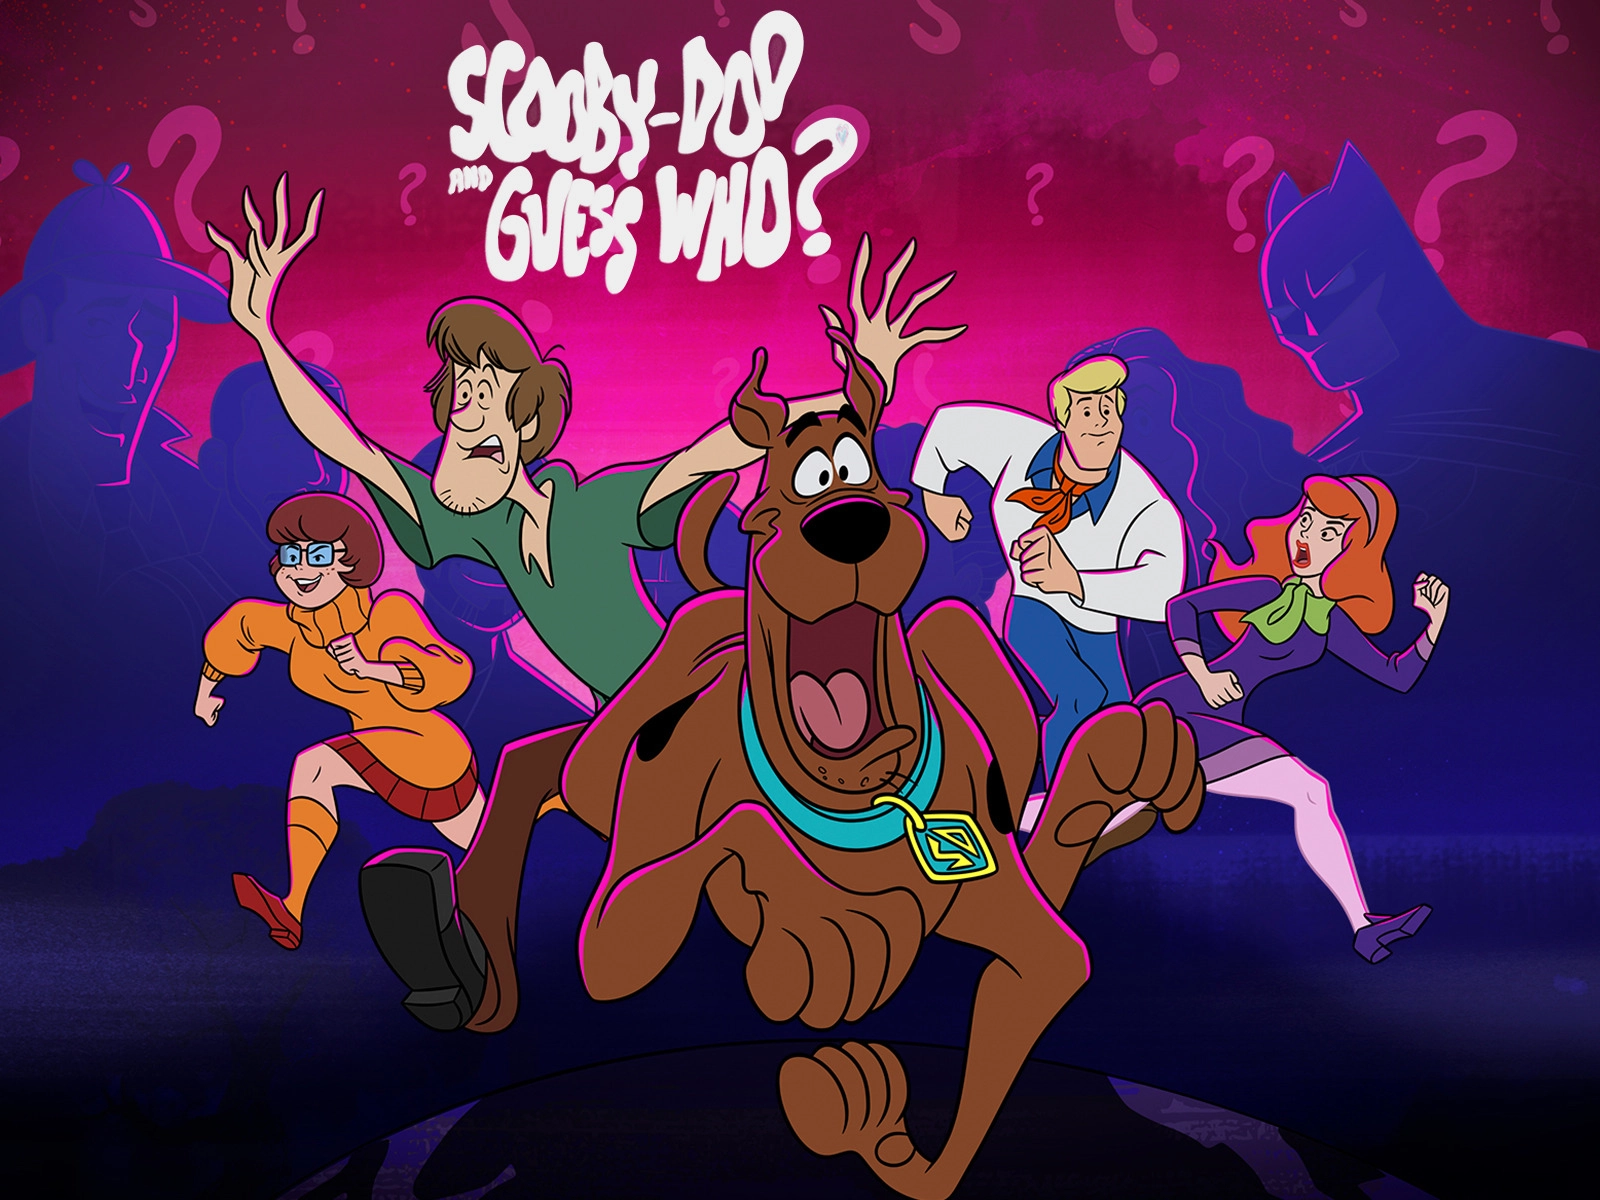 Scooby-doo and guess who? (phần 2) - Scooby-doo and guess who? (season 2)